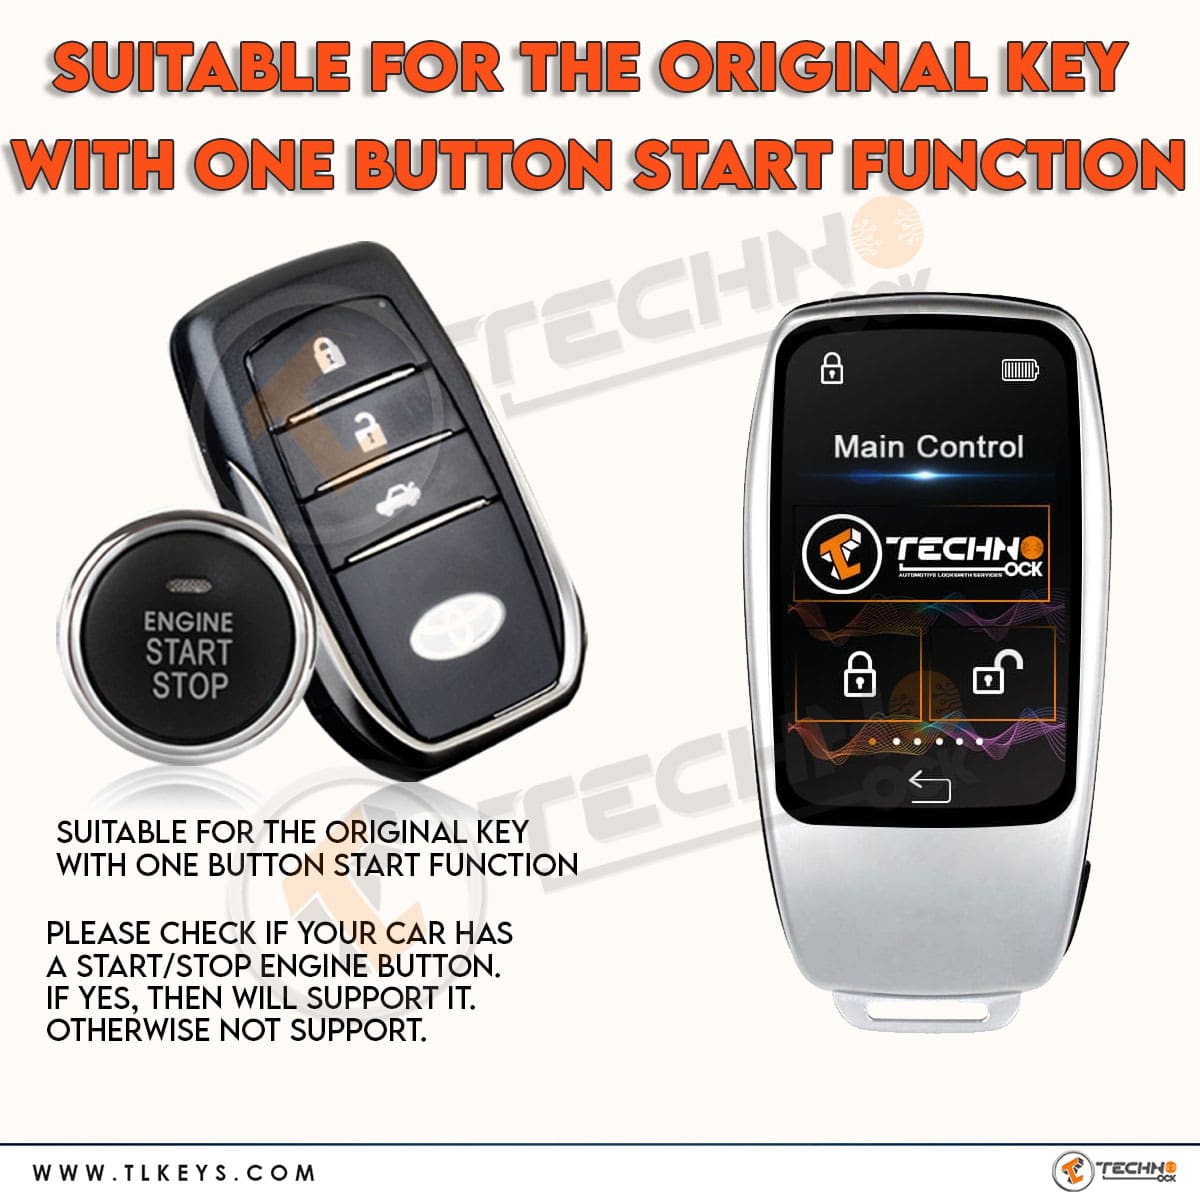 Suitable for an original key with a one-button start function